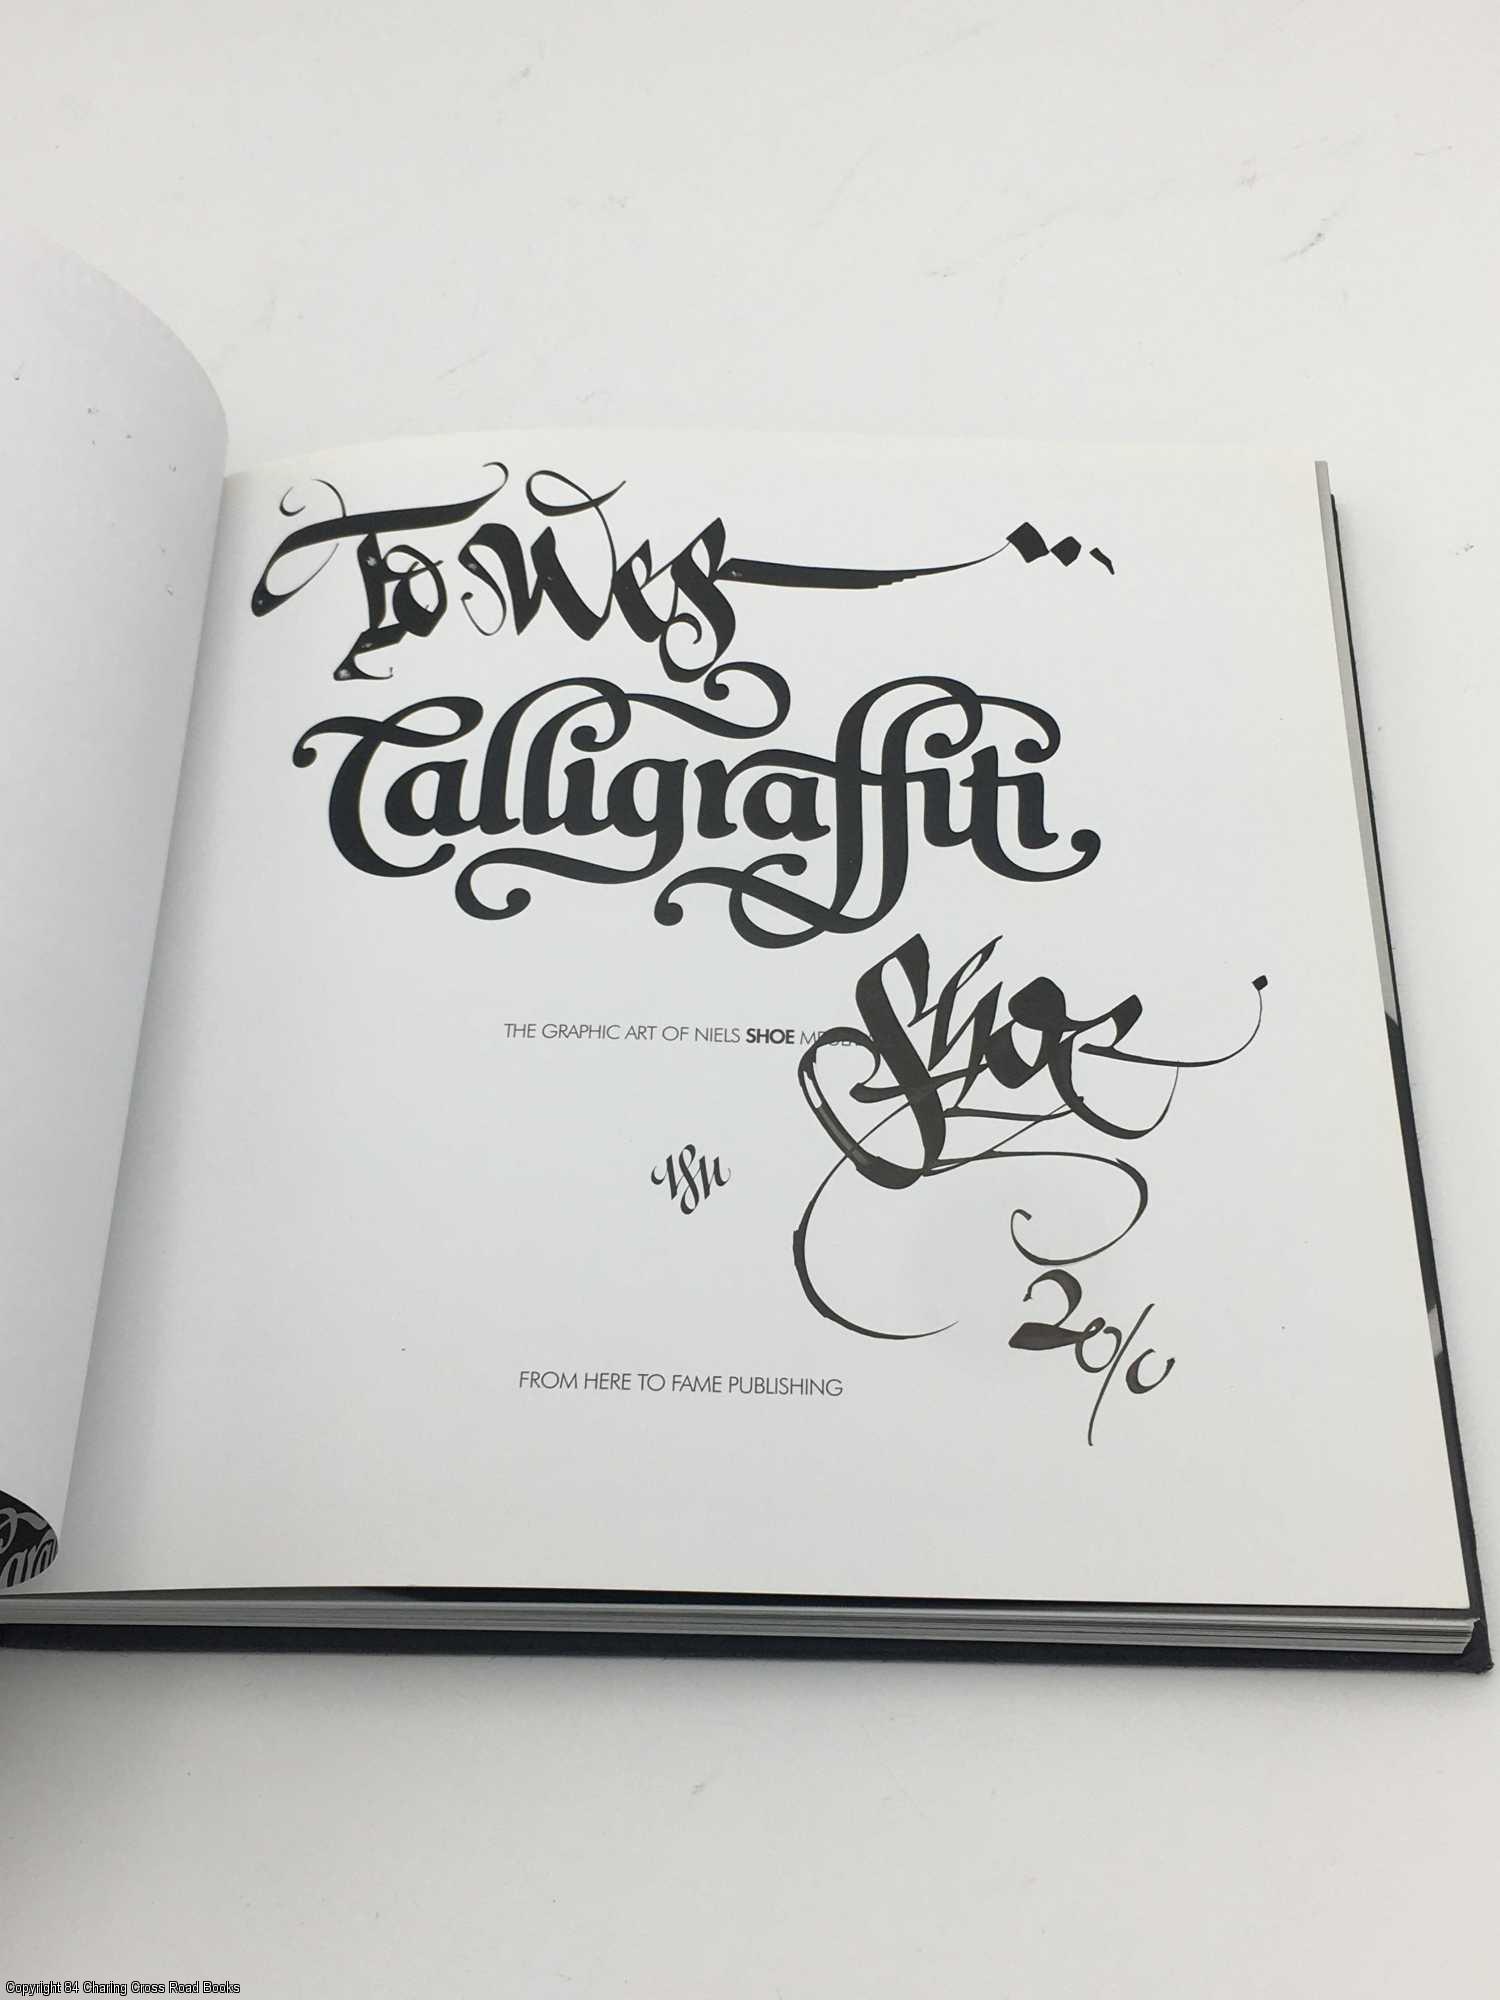 Calligraffiti: The Graphic Art of Niels 'Shoe' Meulman by Eeuwens, Langdon  on 84 Charing Cross Rare Books